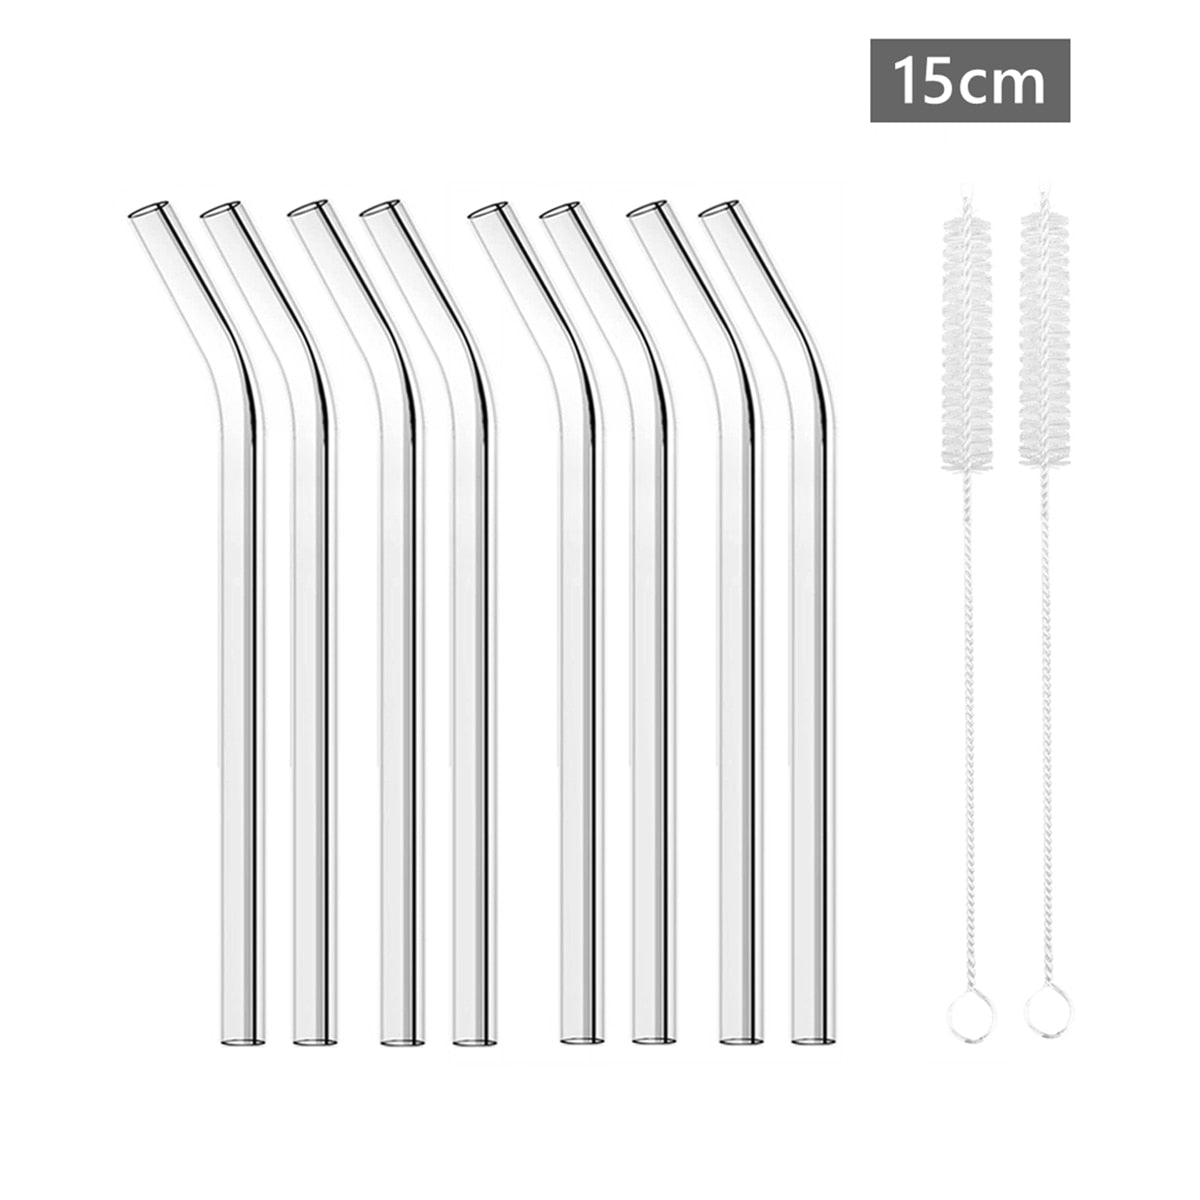 4/8pcs Reusable Glass Straws Eco-friendly Drinking Straws for Smoothies Milk Coffee Drinks Bar Accessories Short Cocktail Straws